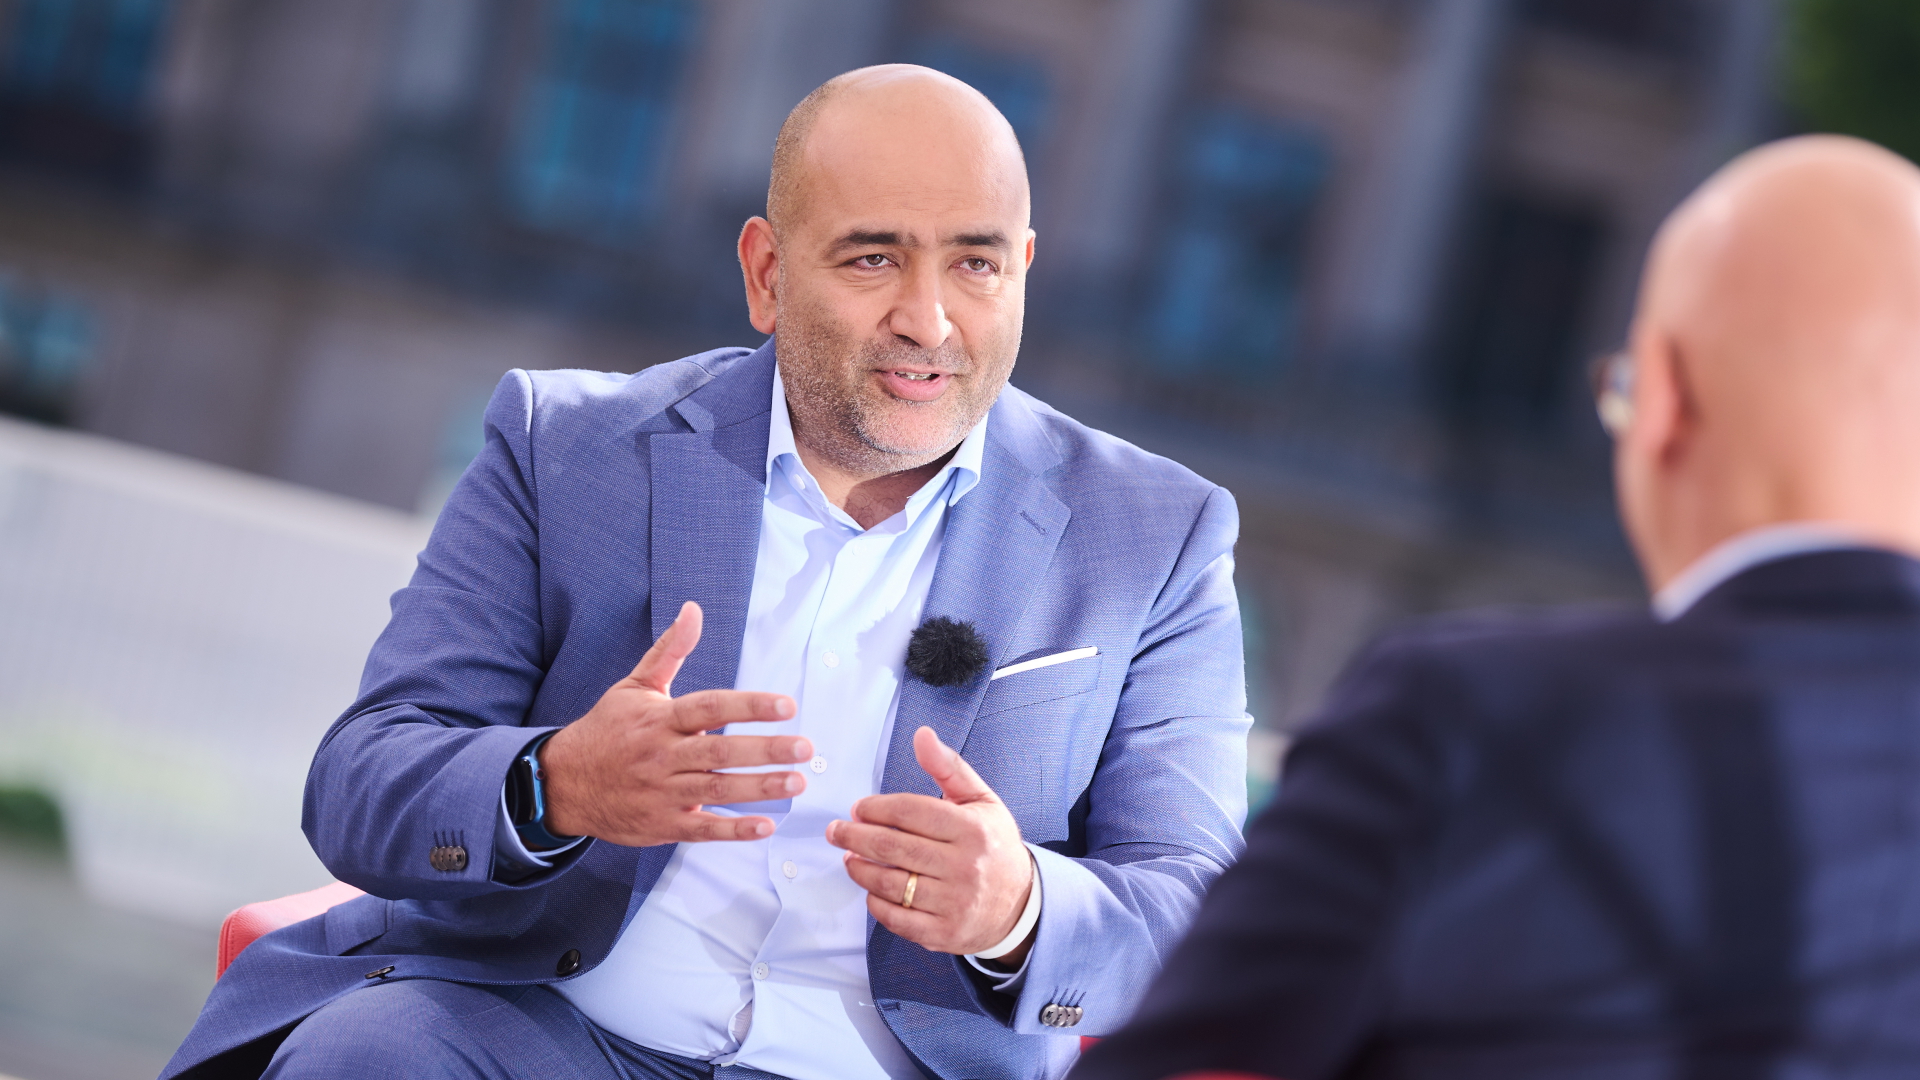 Omid Nouripour im ARD-Sommerinterview. | dpa